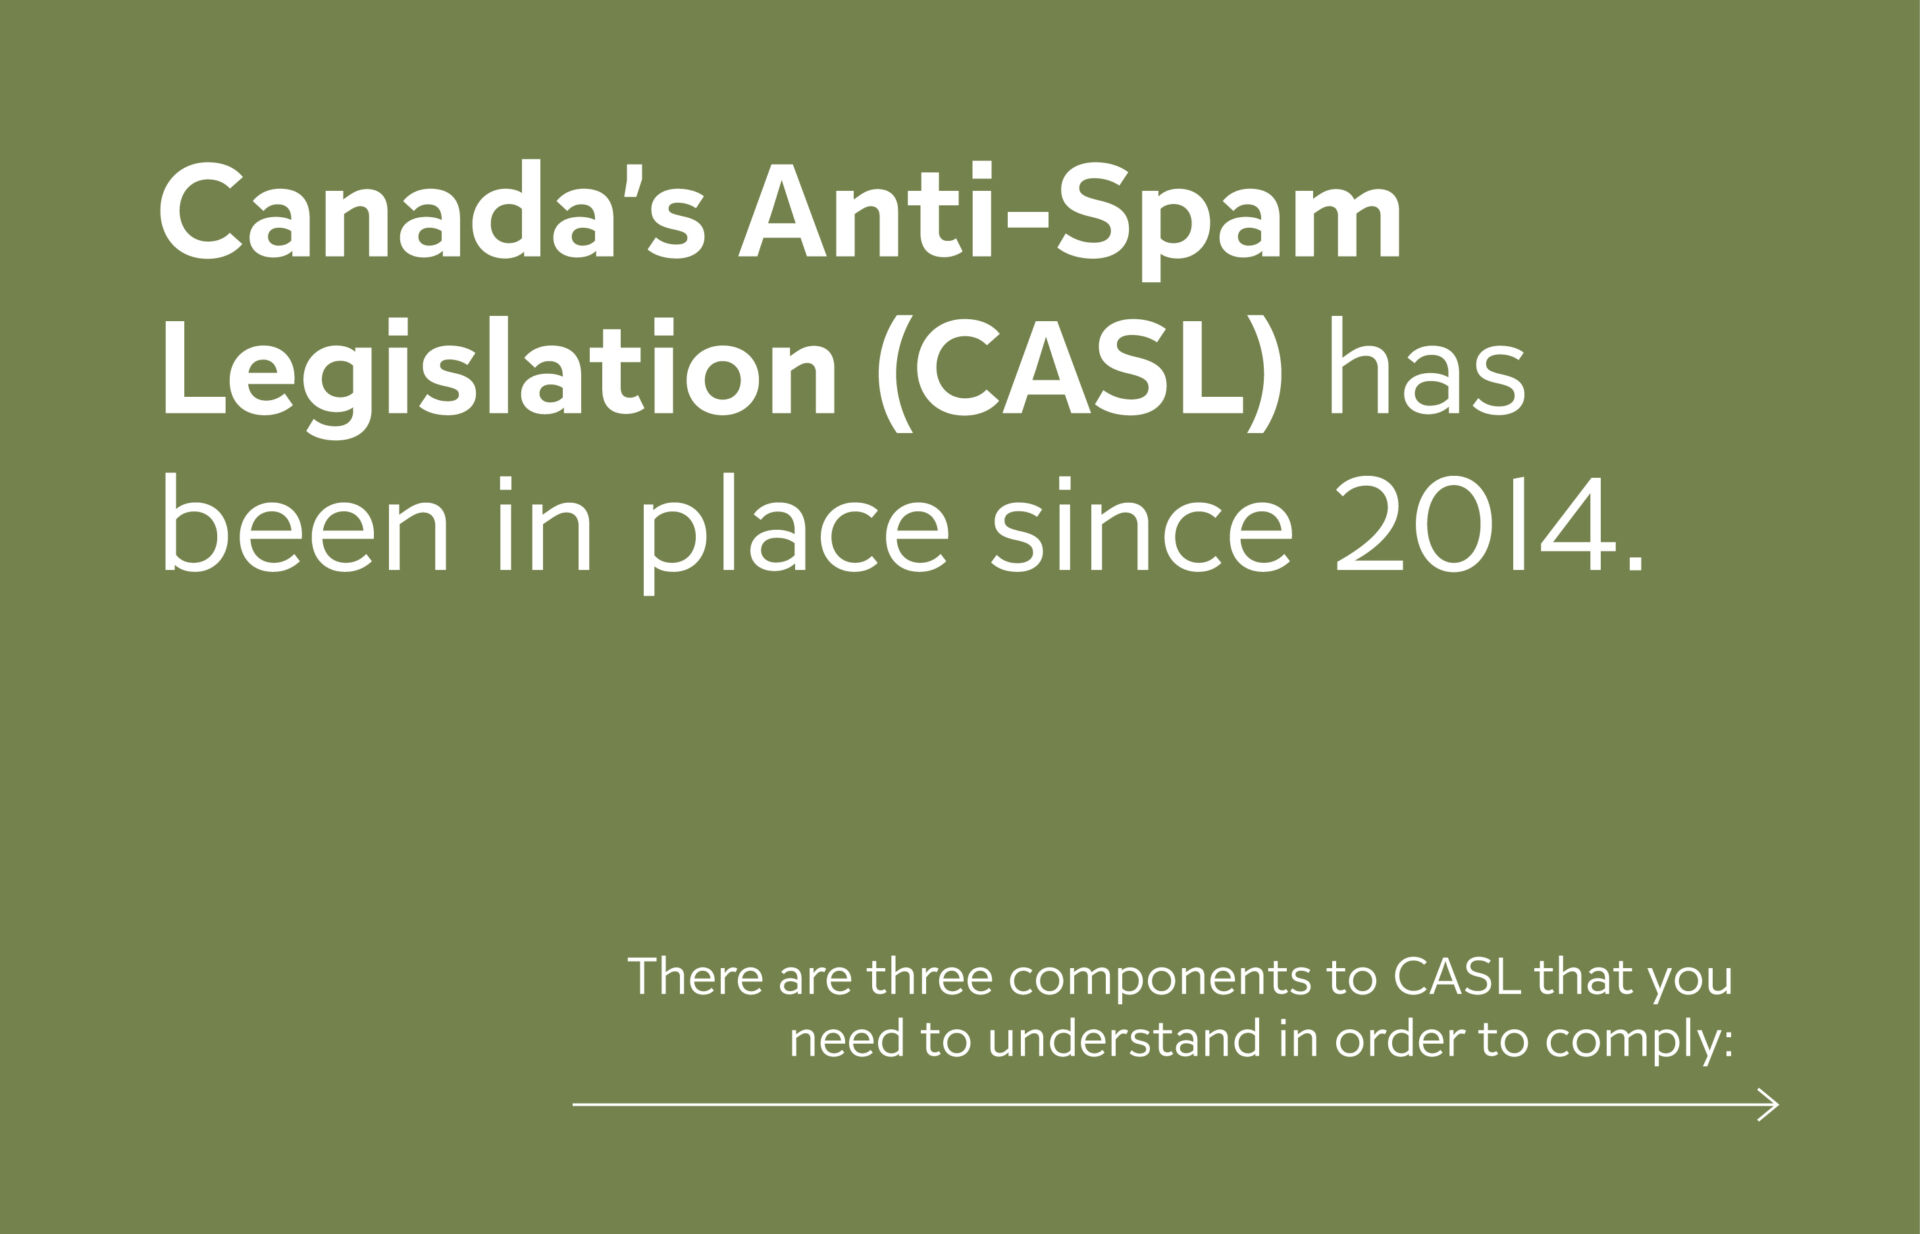 Canada's anti-spam legislation has been in place since 2014